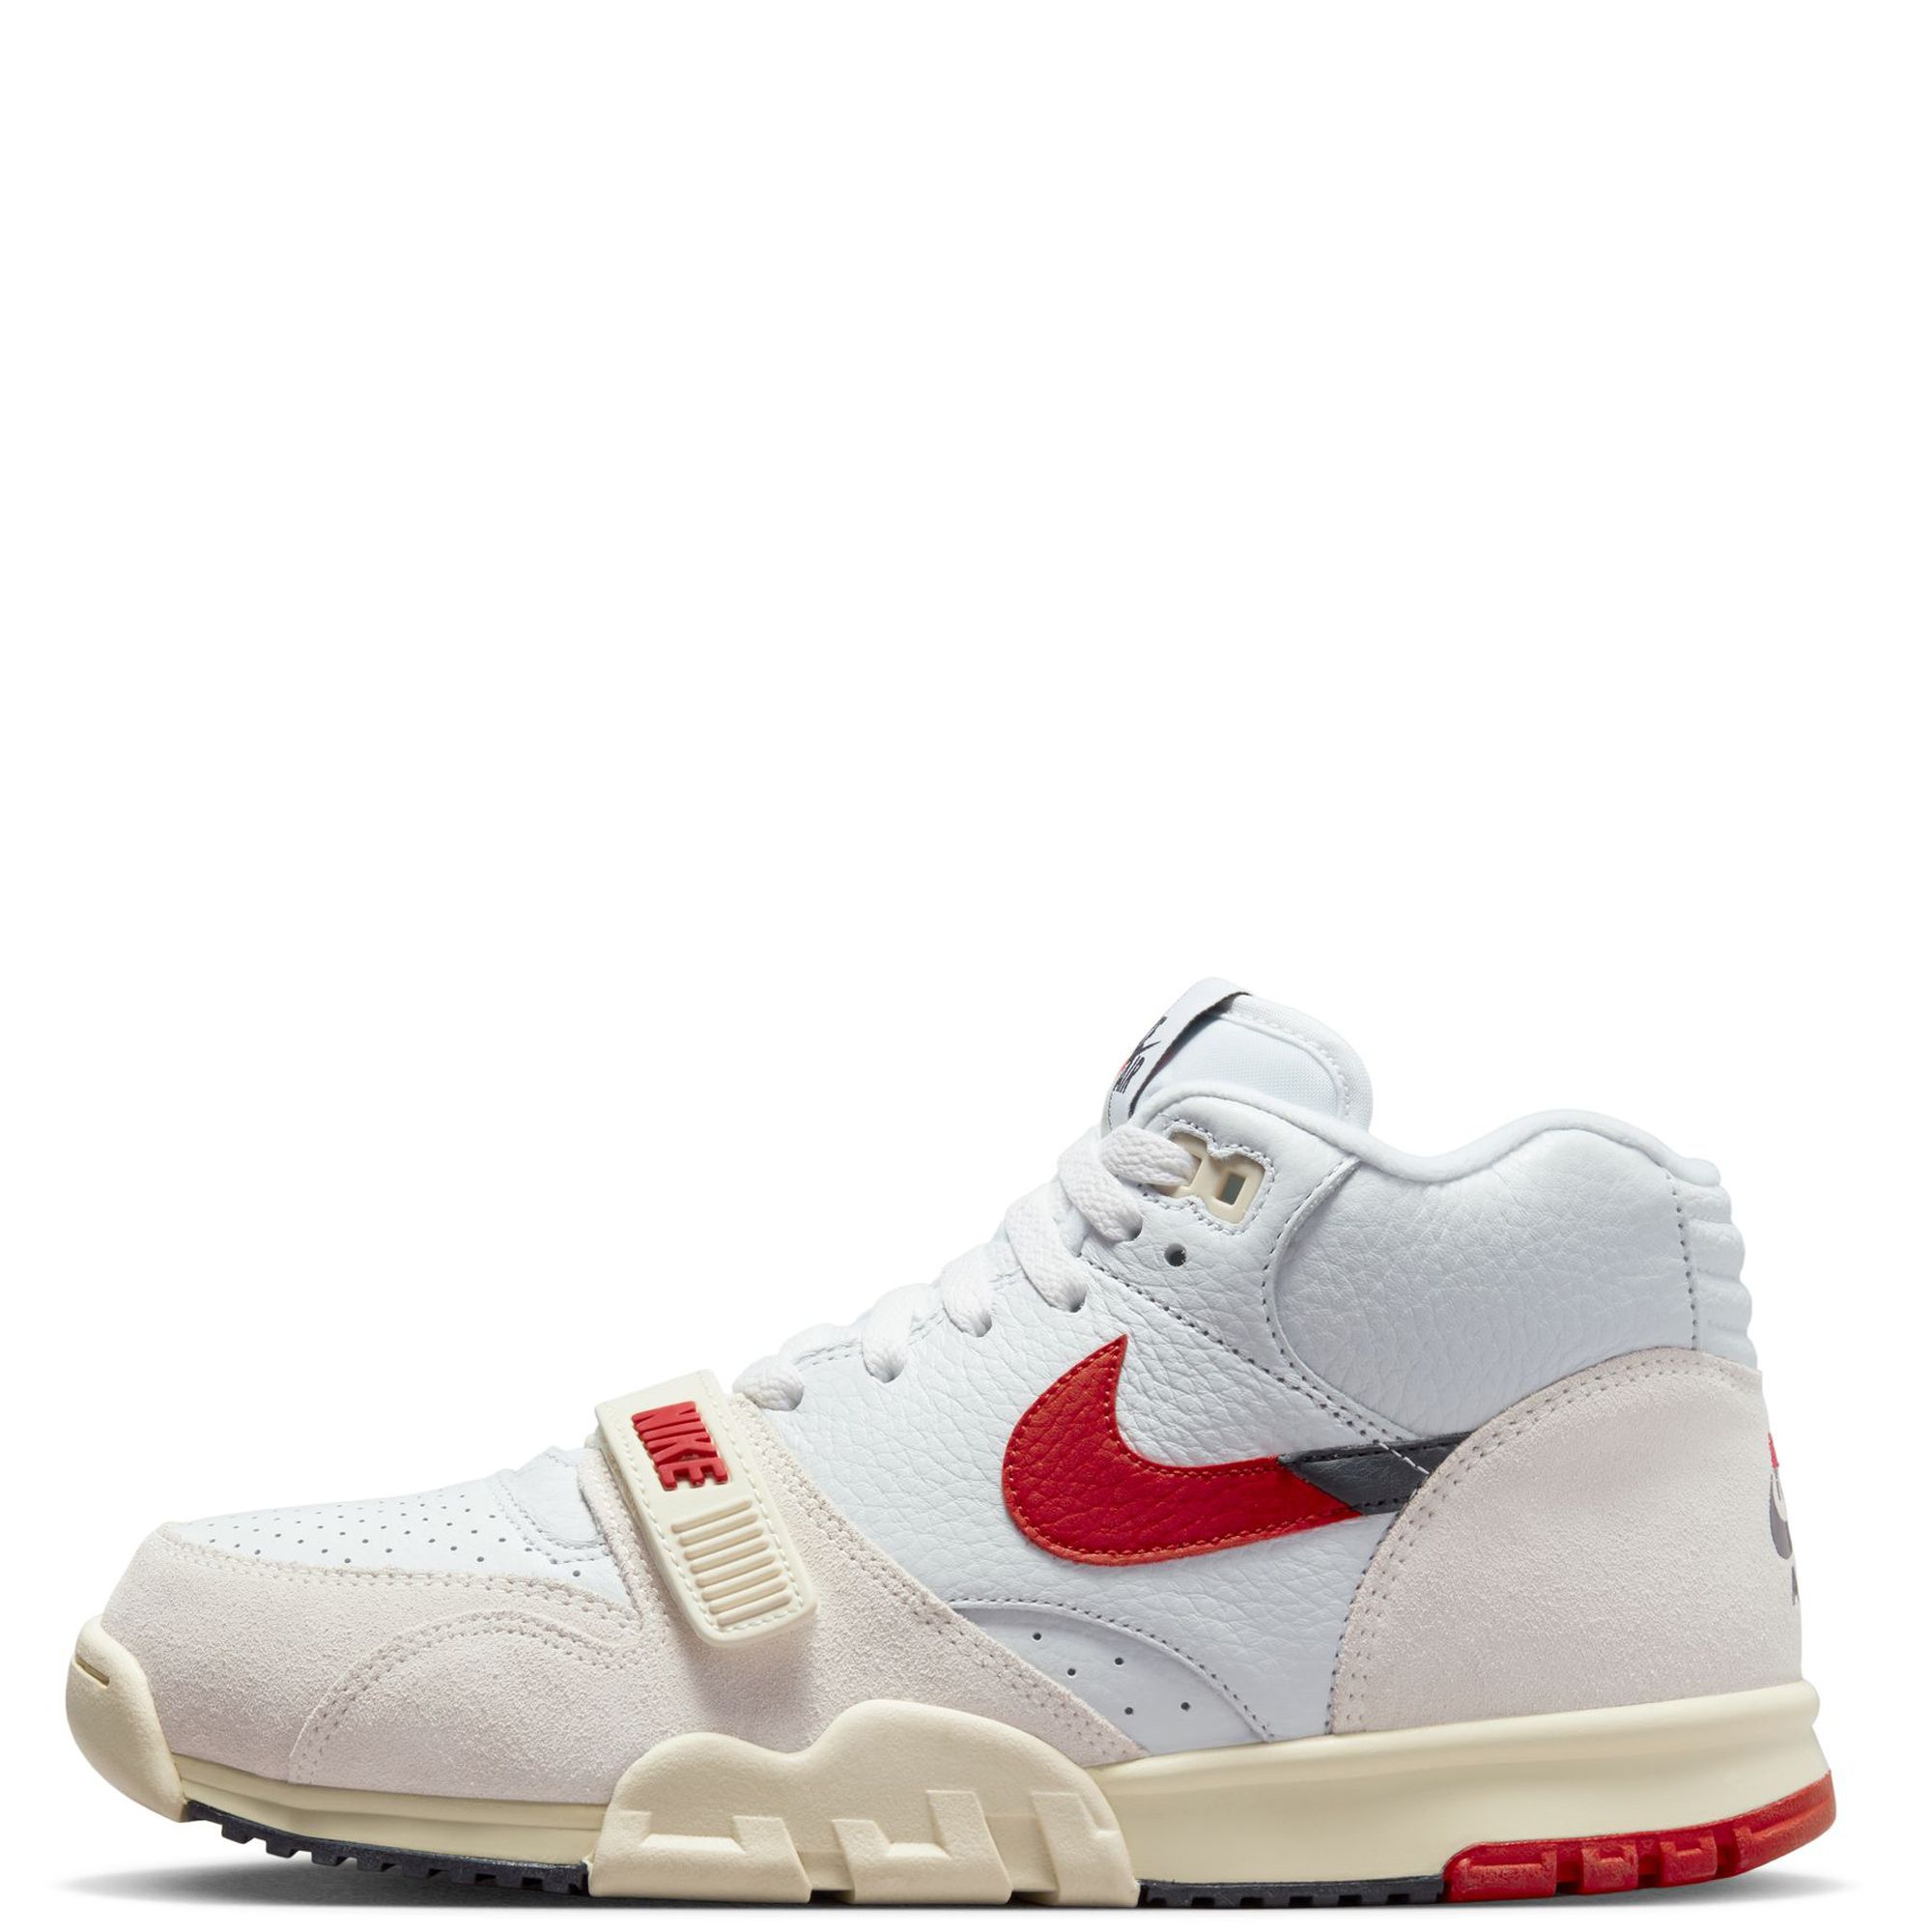 Nike Air Trainer 1 Men's Shoes.